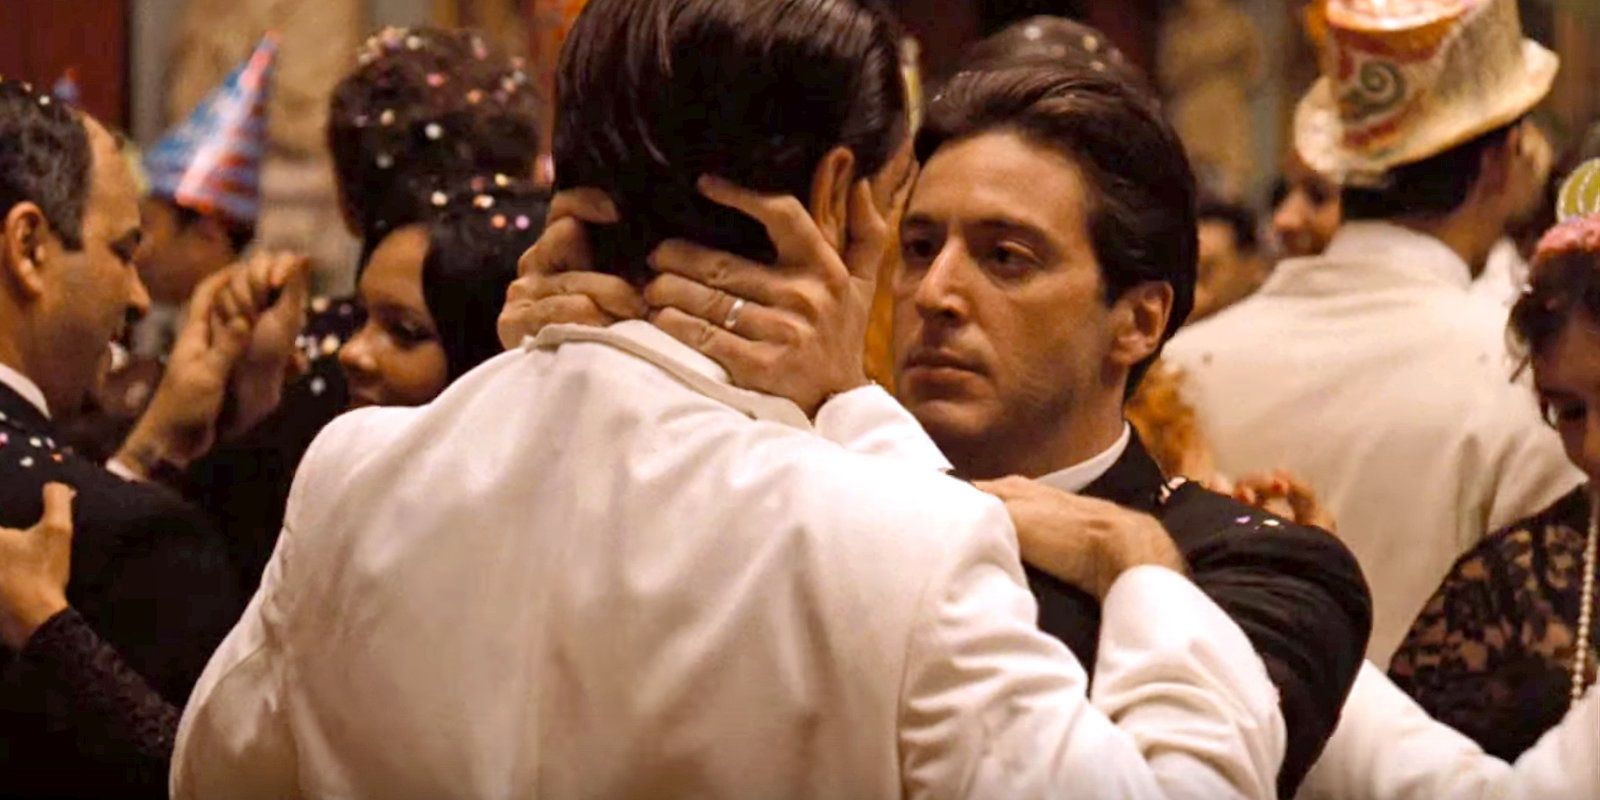 Michael holding Fredo's neck in the middle of a crowd in The Godfather: Part II.